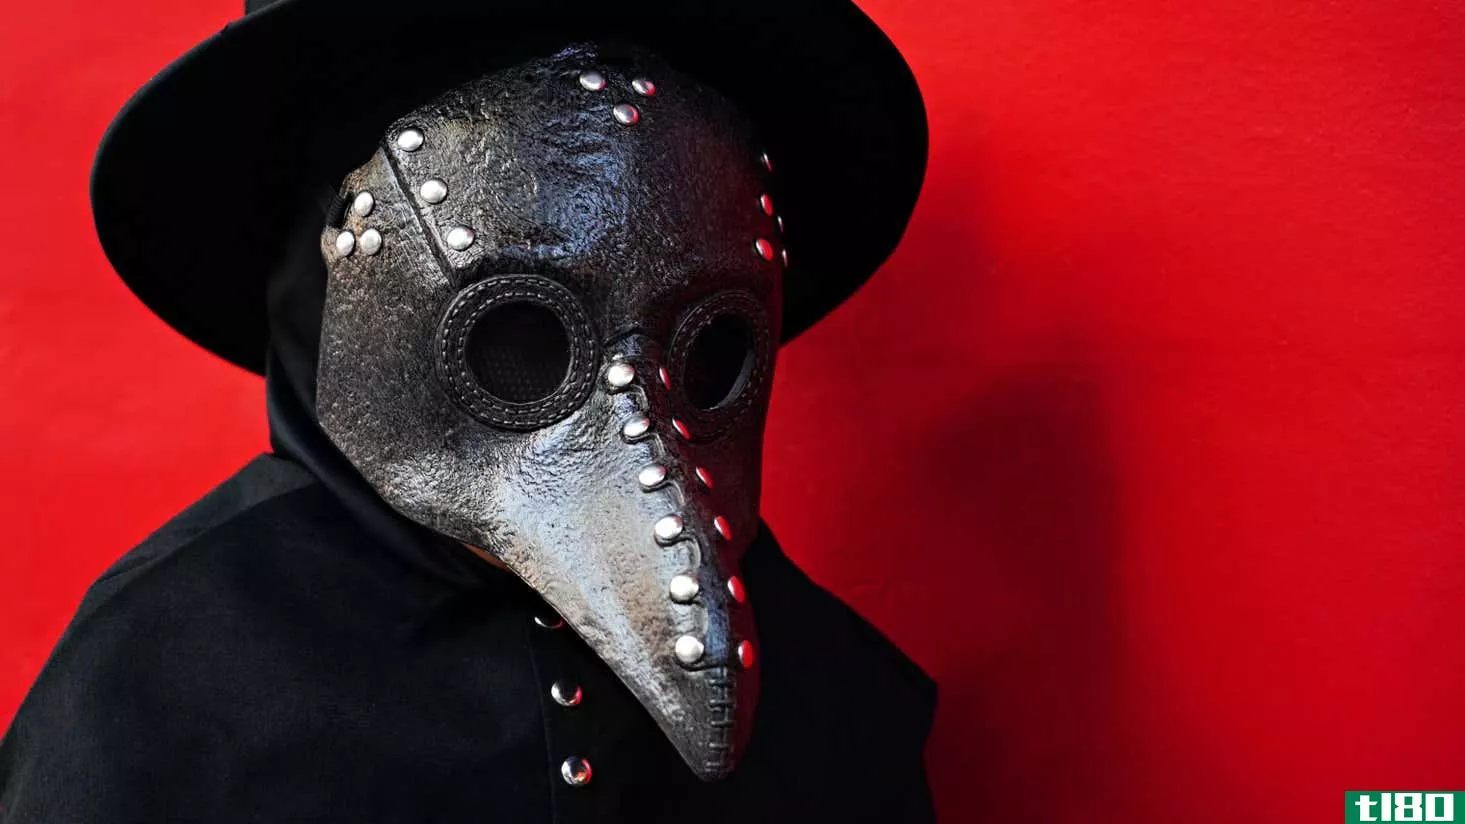 A person dressed in a plague mask and black hat, standing against a red background